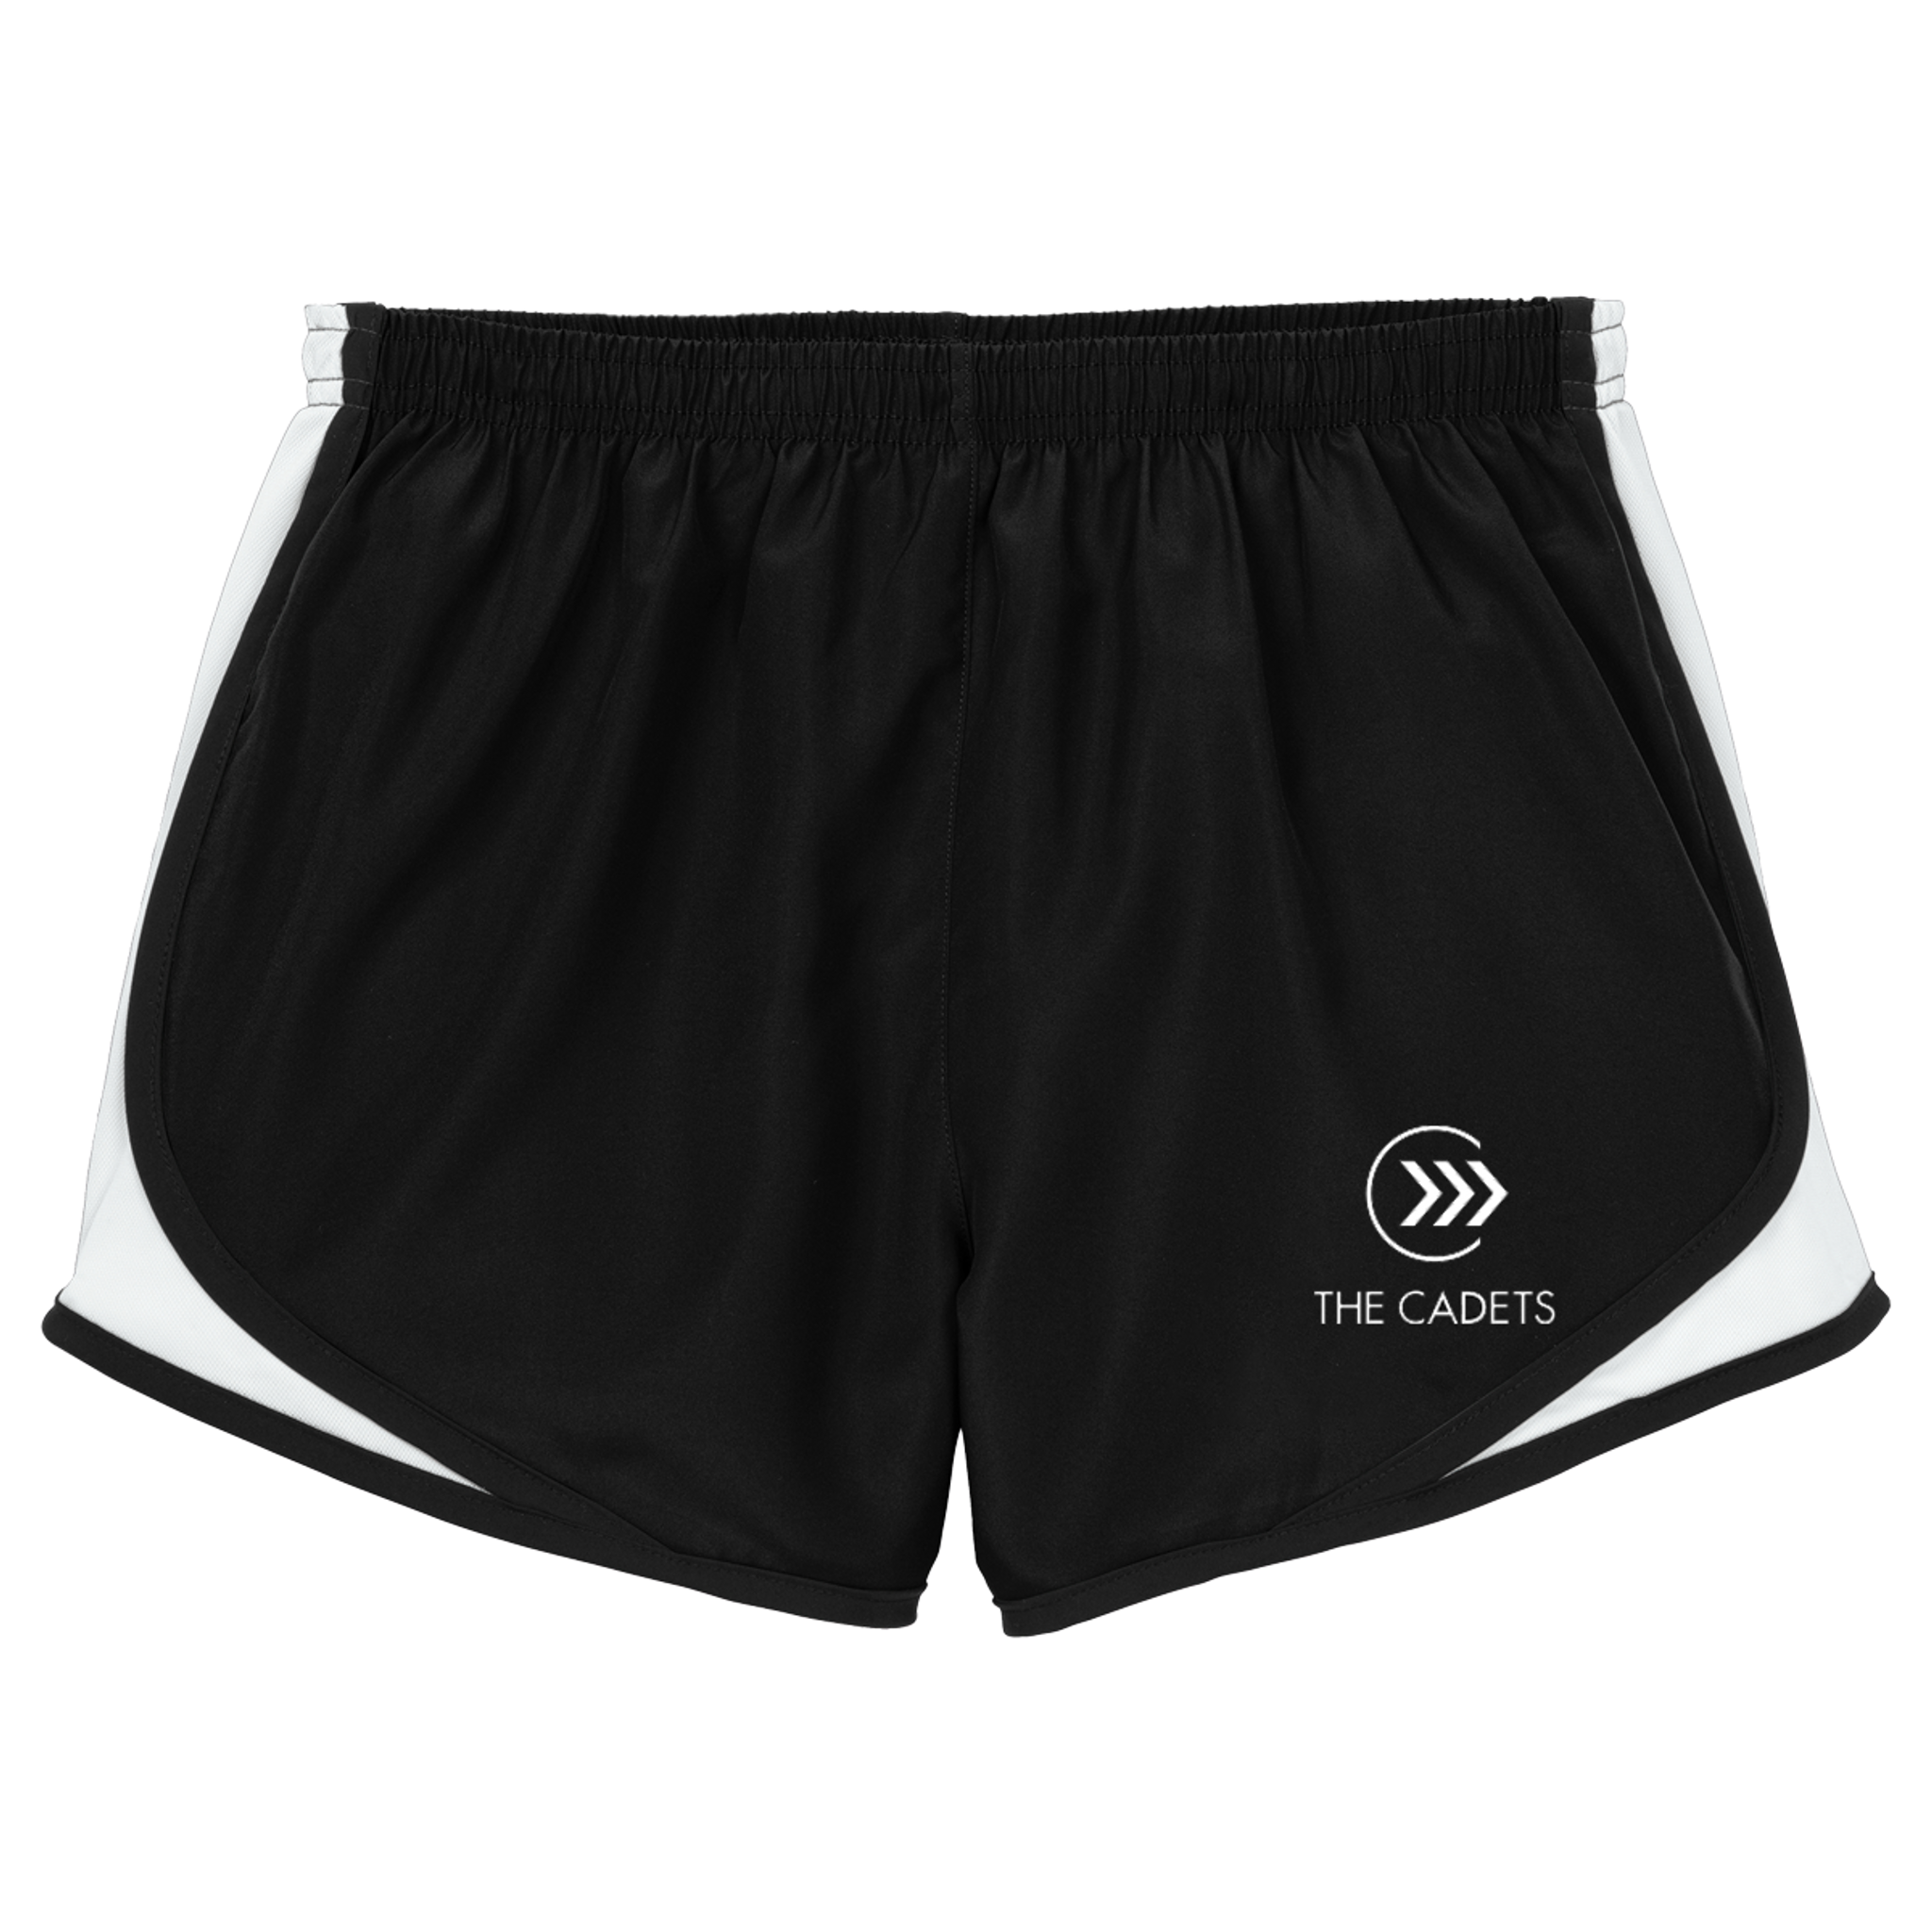 The Cadets Running Shorts